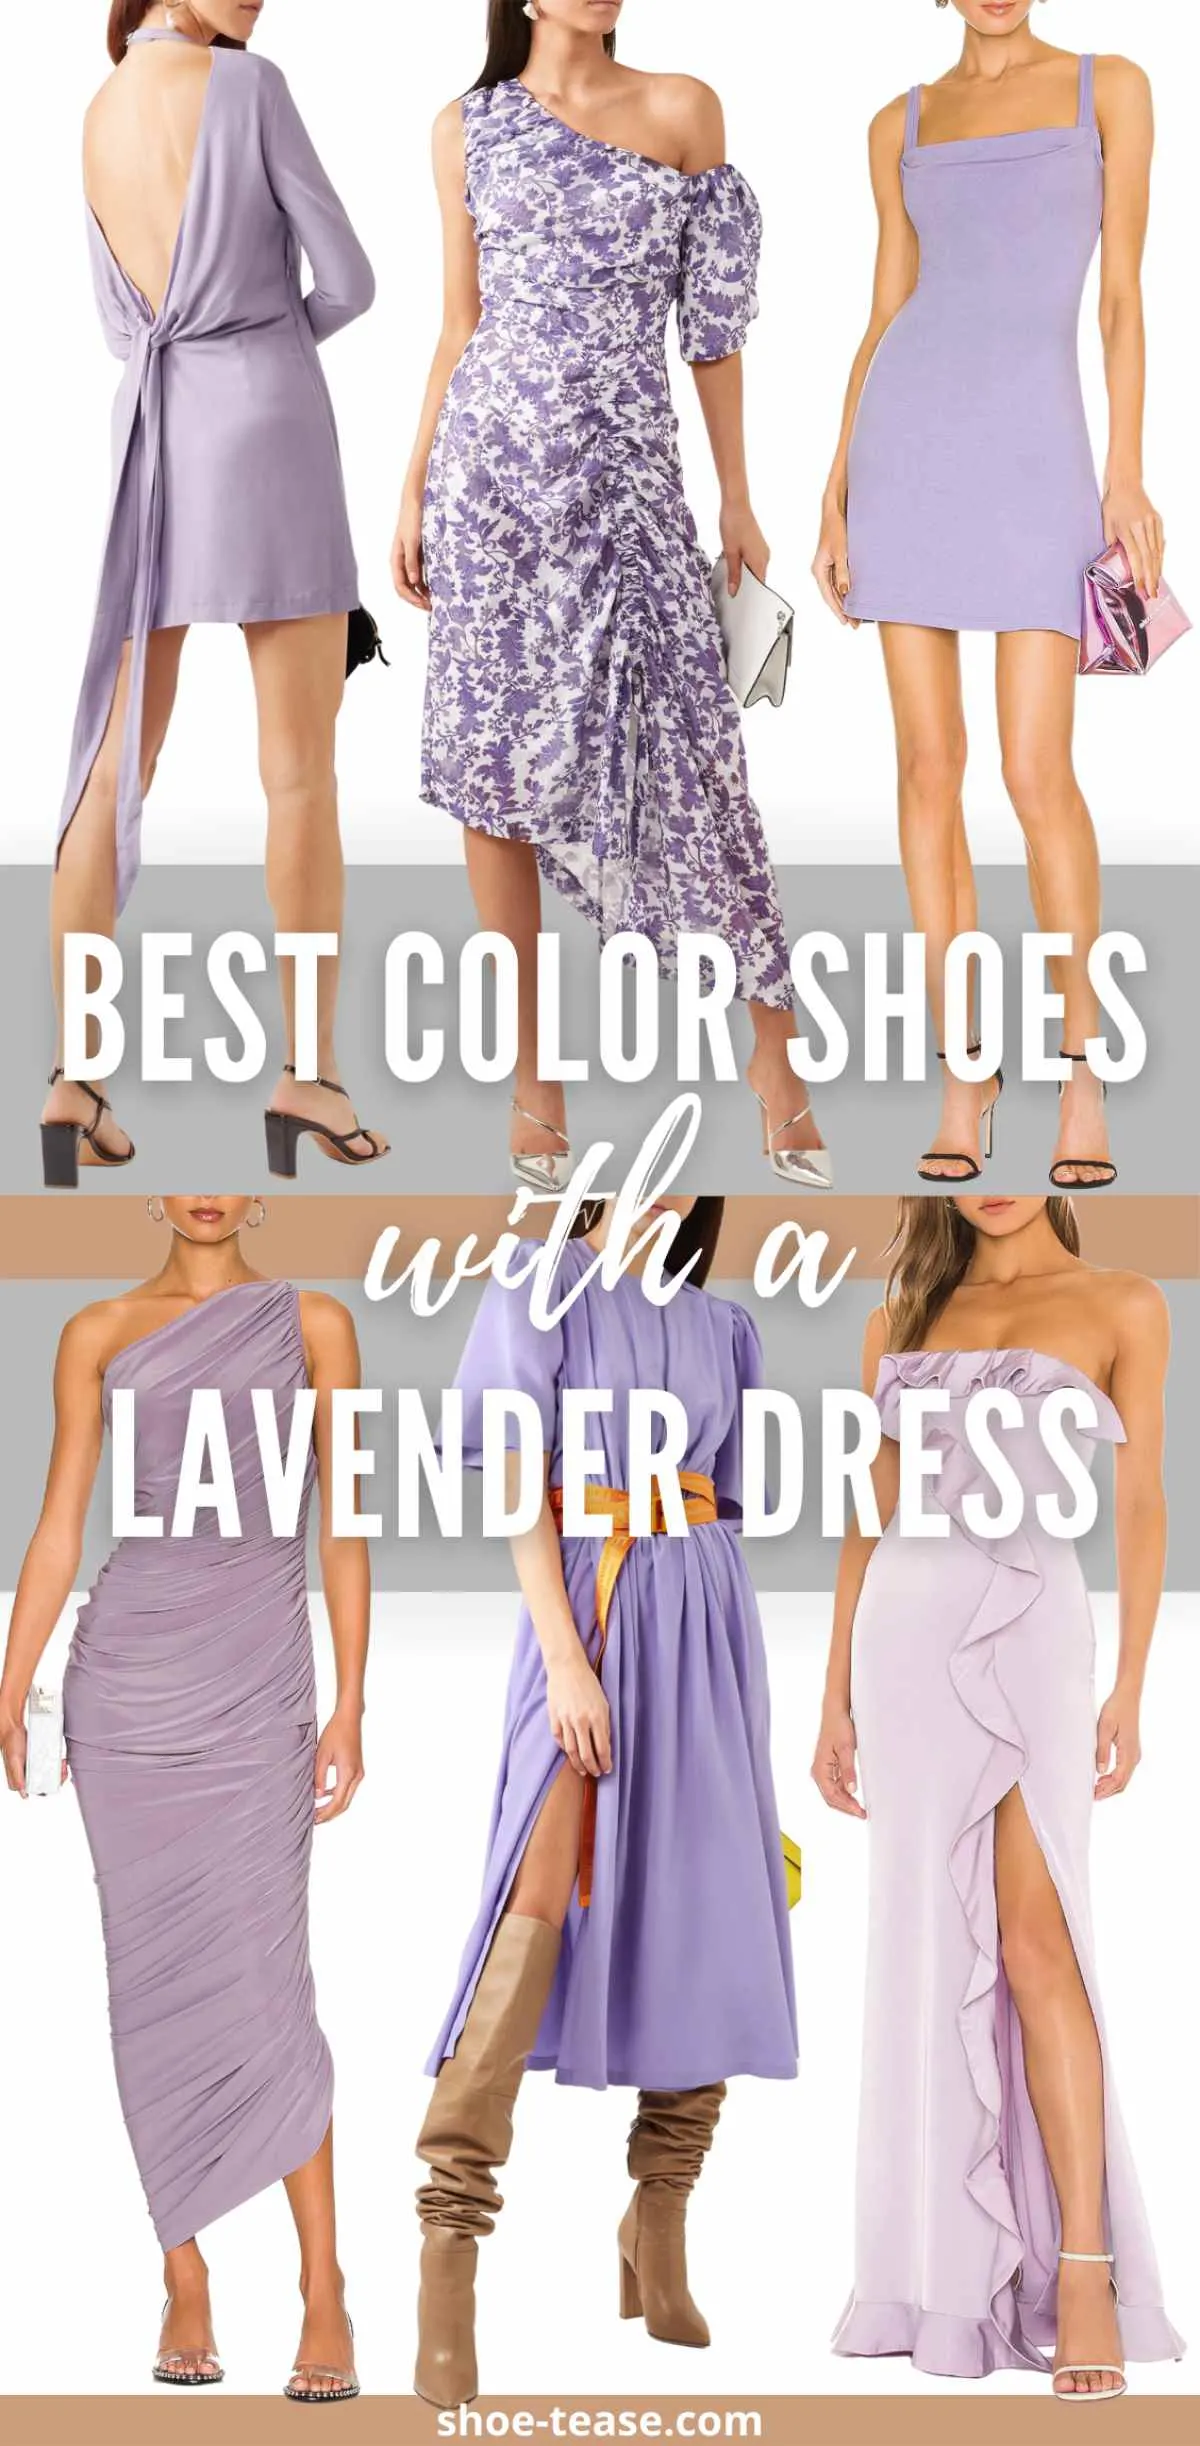 What color shoes to wear with a lavender dress